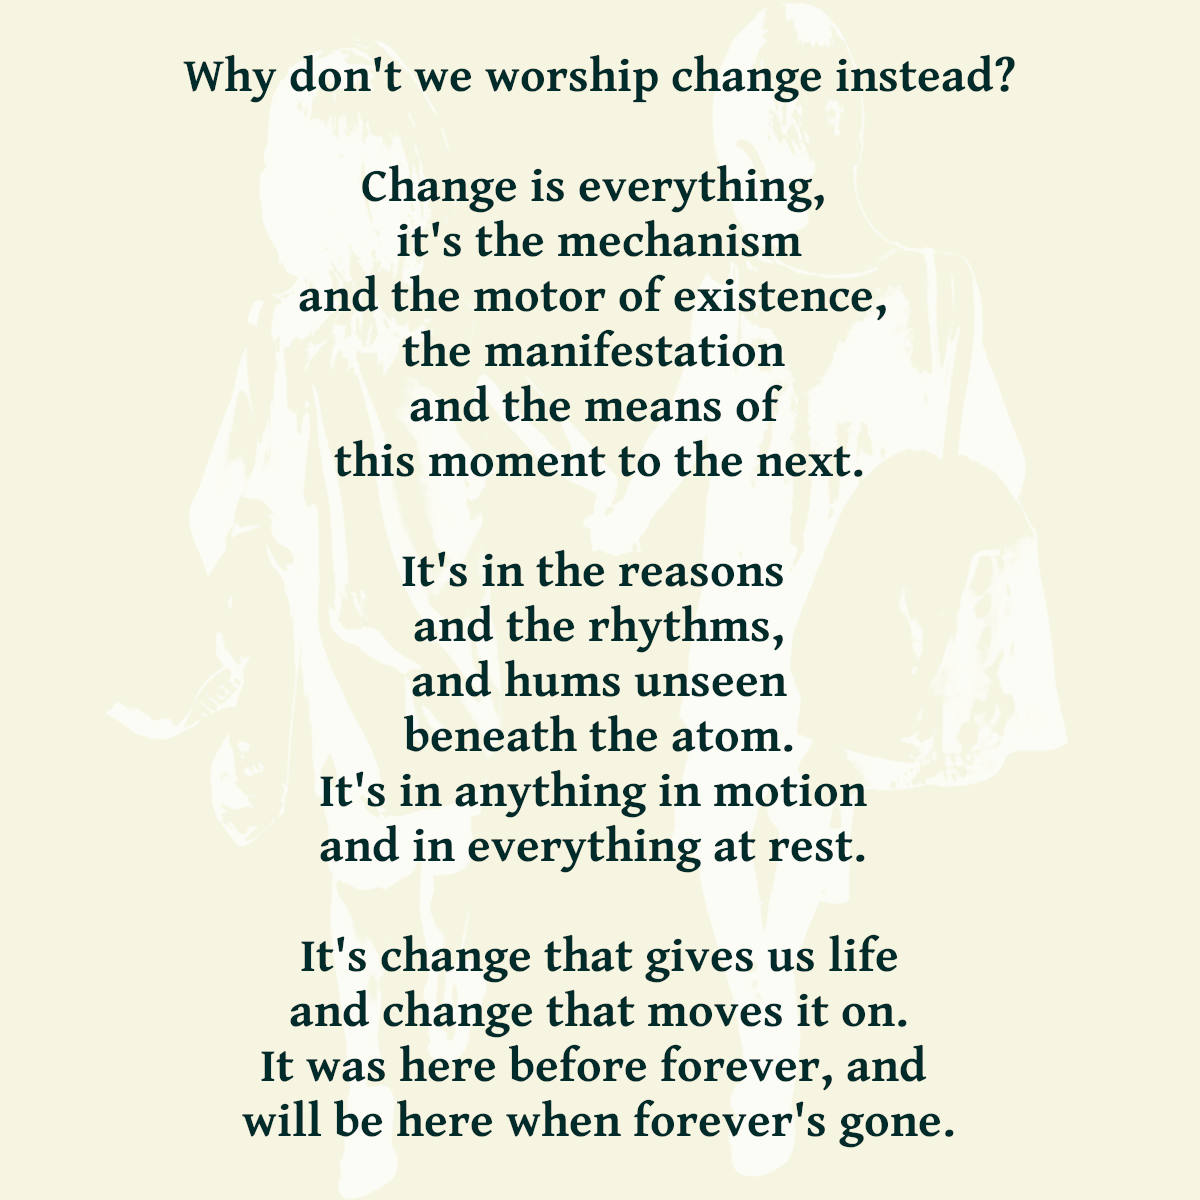 Why don't we worship change instead?

Are you where you want to be?                                            
Plan to Change                                               
paralosdos.com/change 

#comics #comicstrips #life #Space #poetry #MoveMePoetry #change